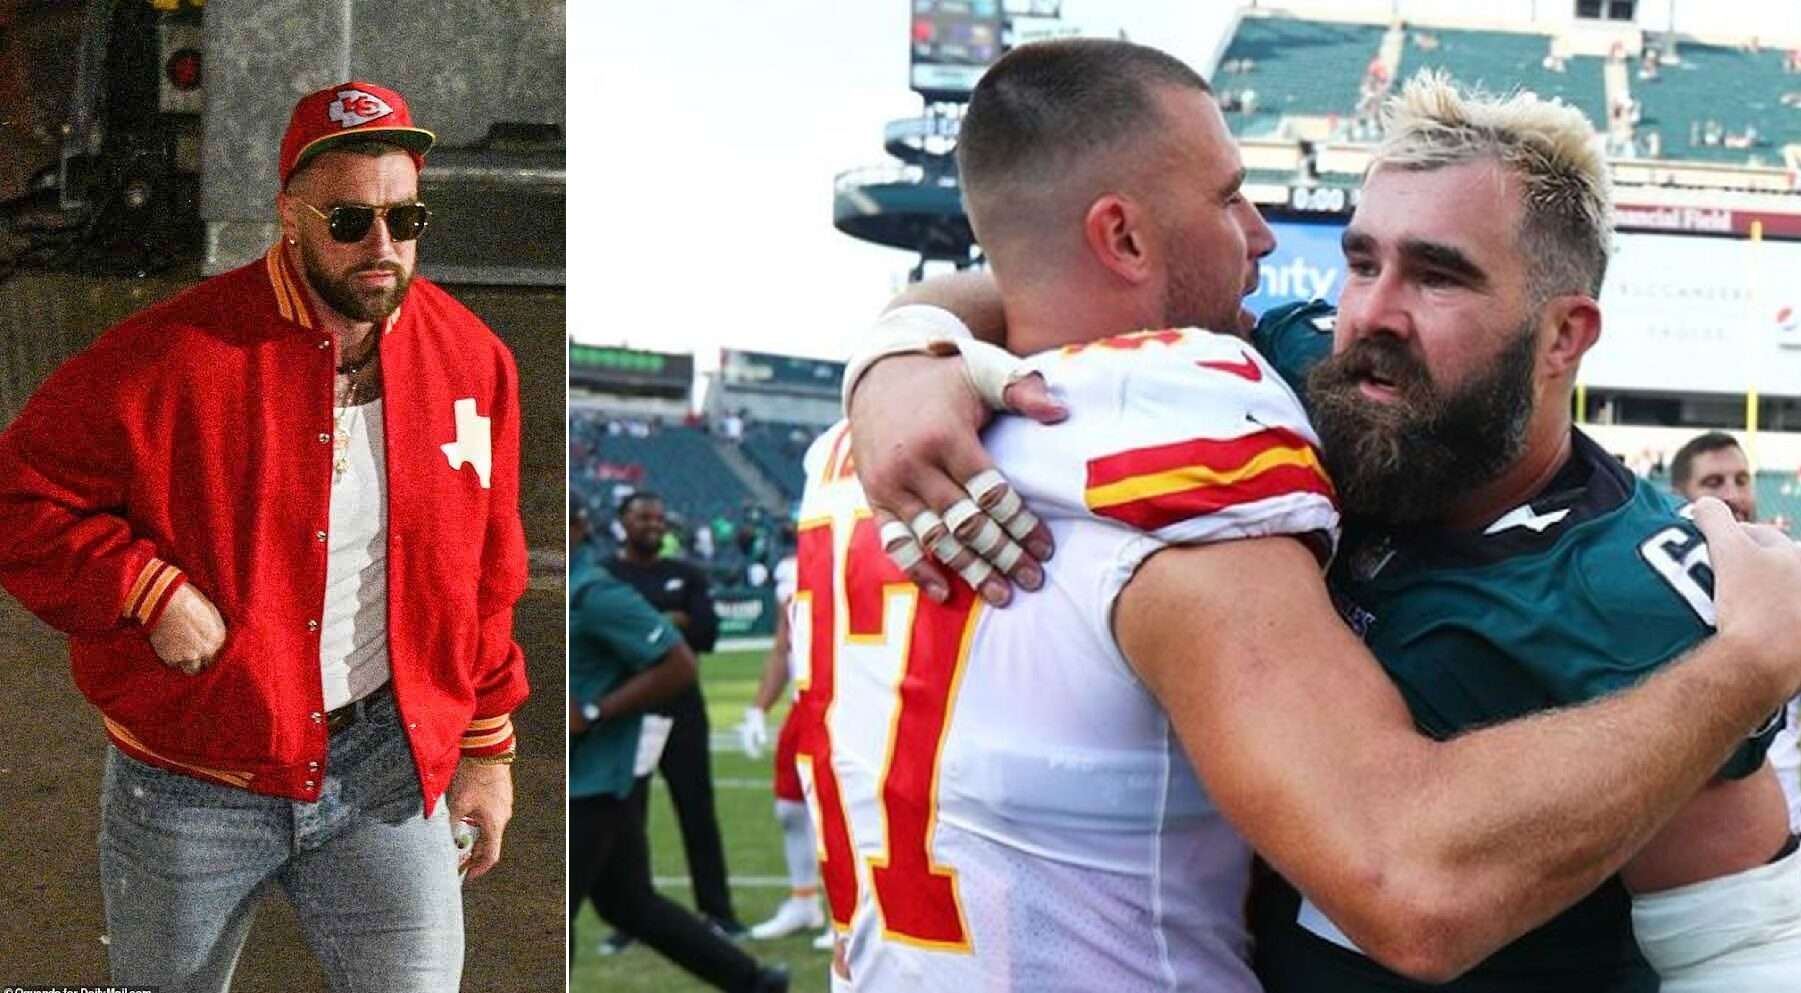 Travis Kelce arrives at Arrowhead Stadium to take on brother Jason and the Philadelphia Eagles in the Chiefs' Super Bowl rematch - but the tight end will have to perform without girlfriend Taylor Swift cheering him on again